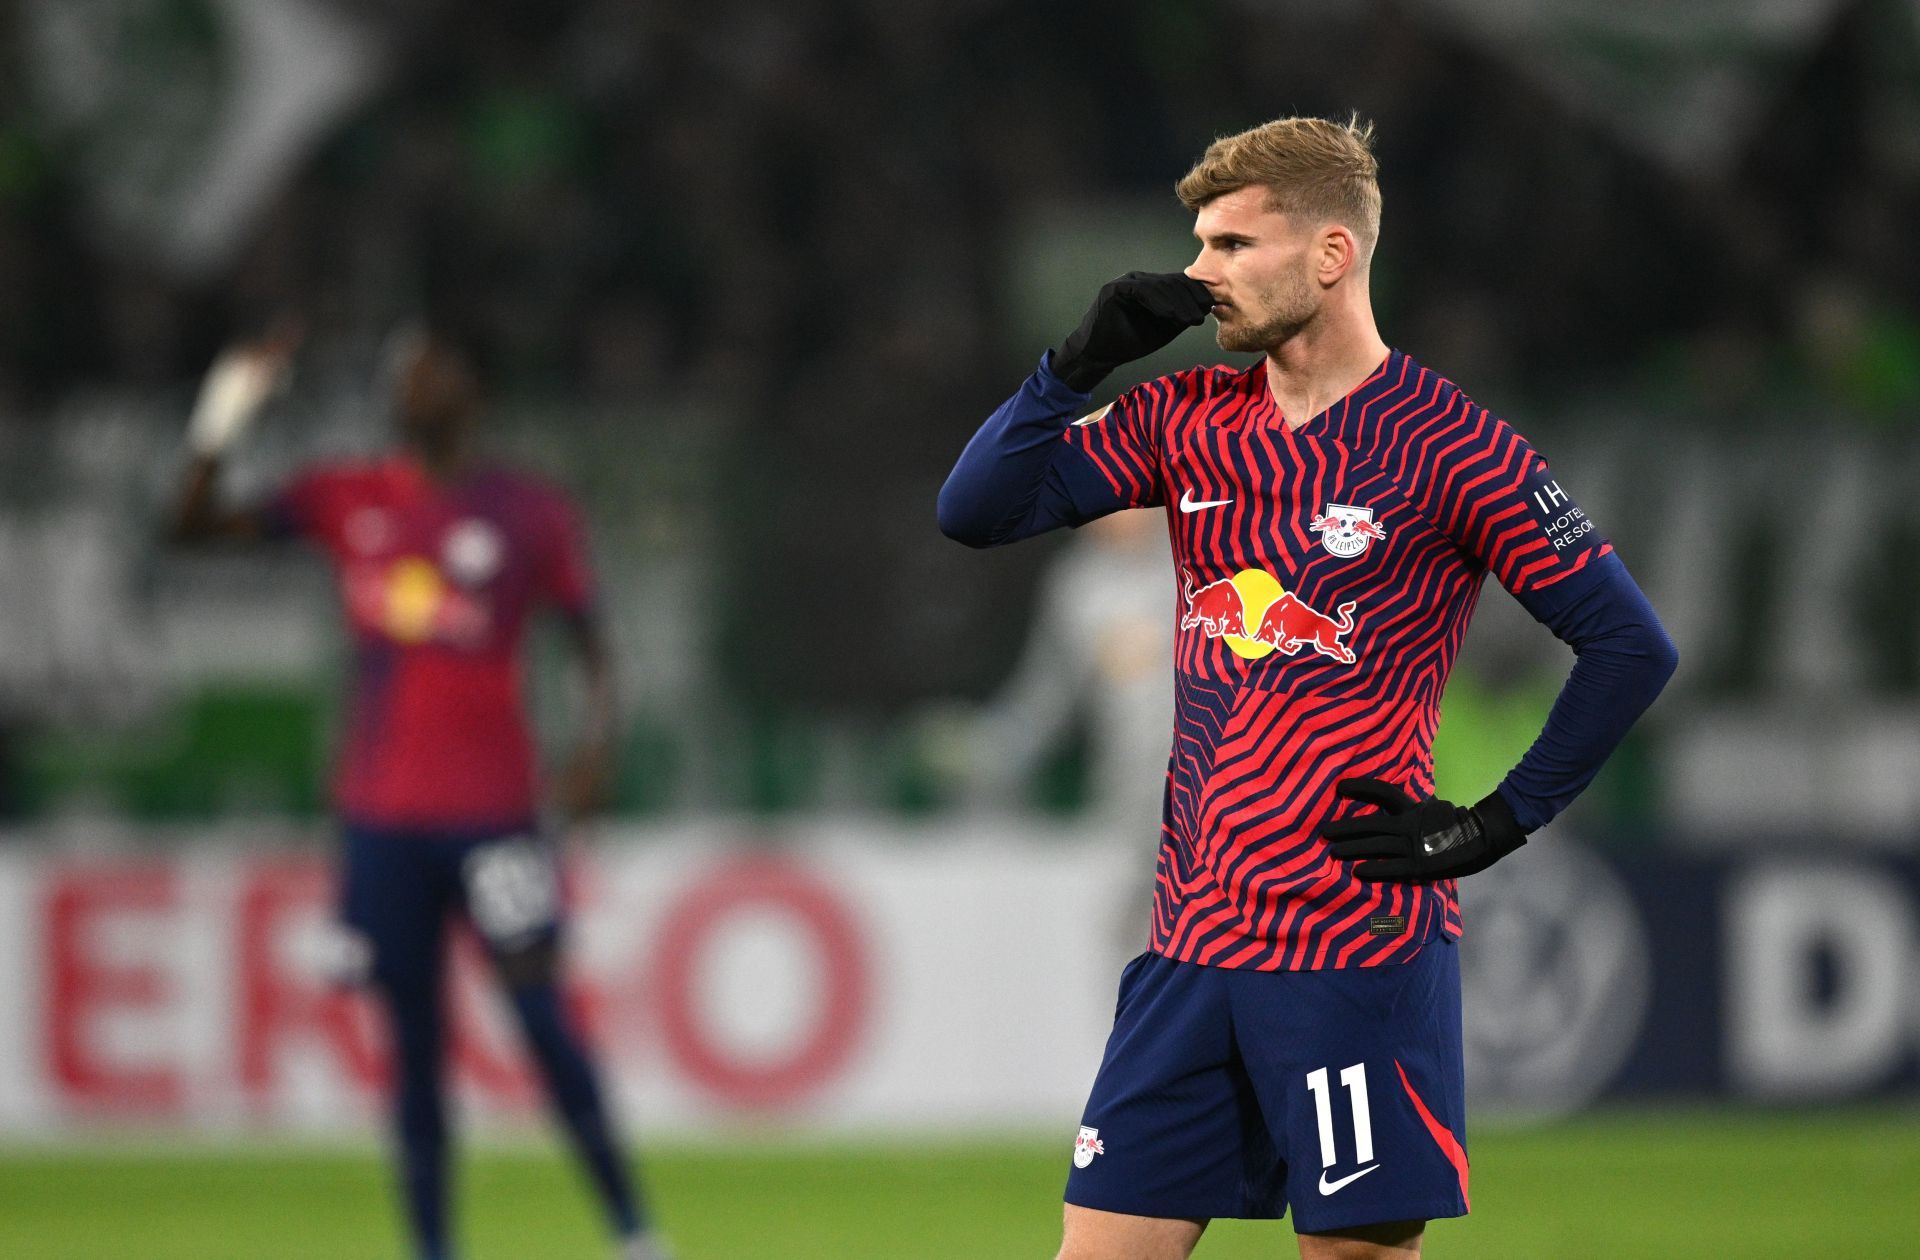 Timo Werner has admirers at Old Trafford.